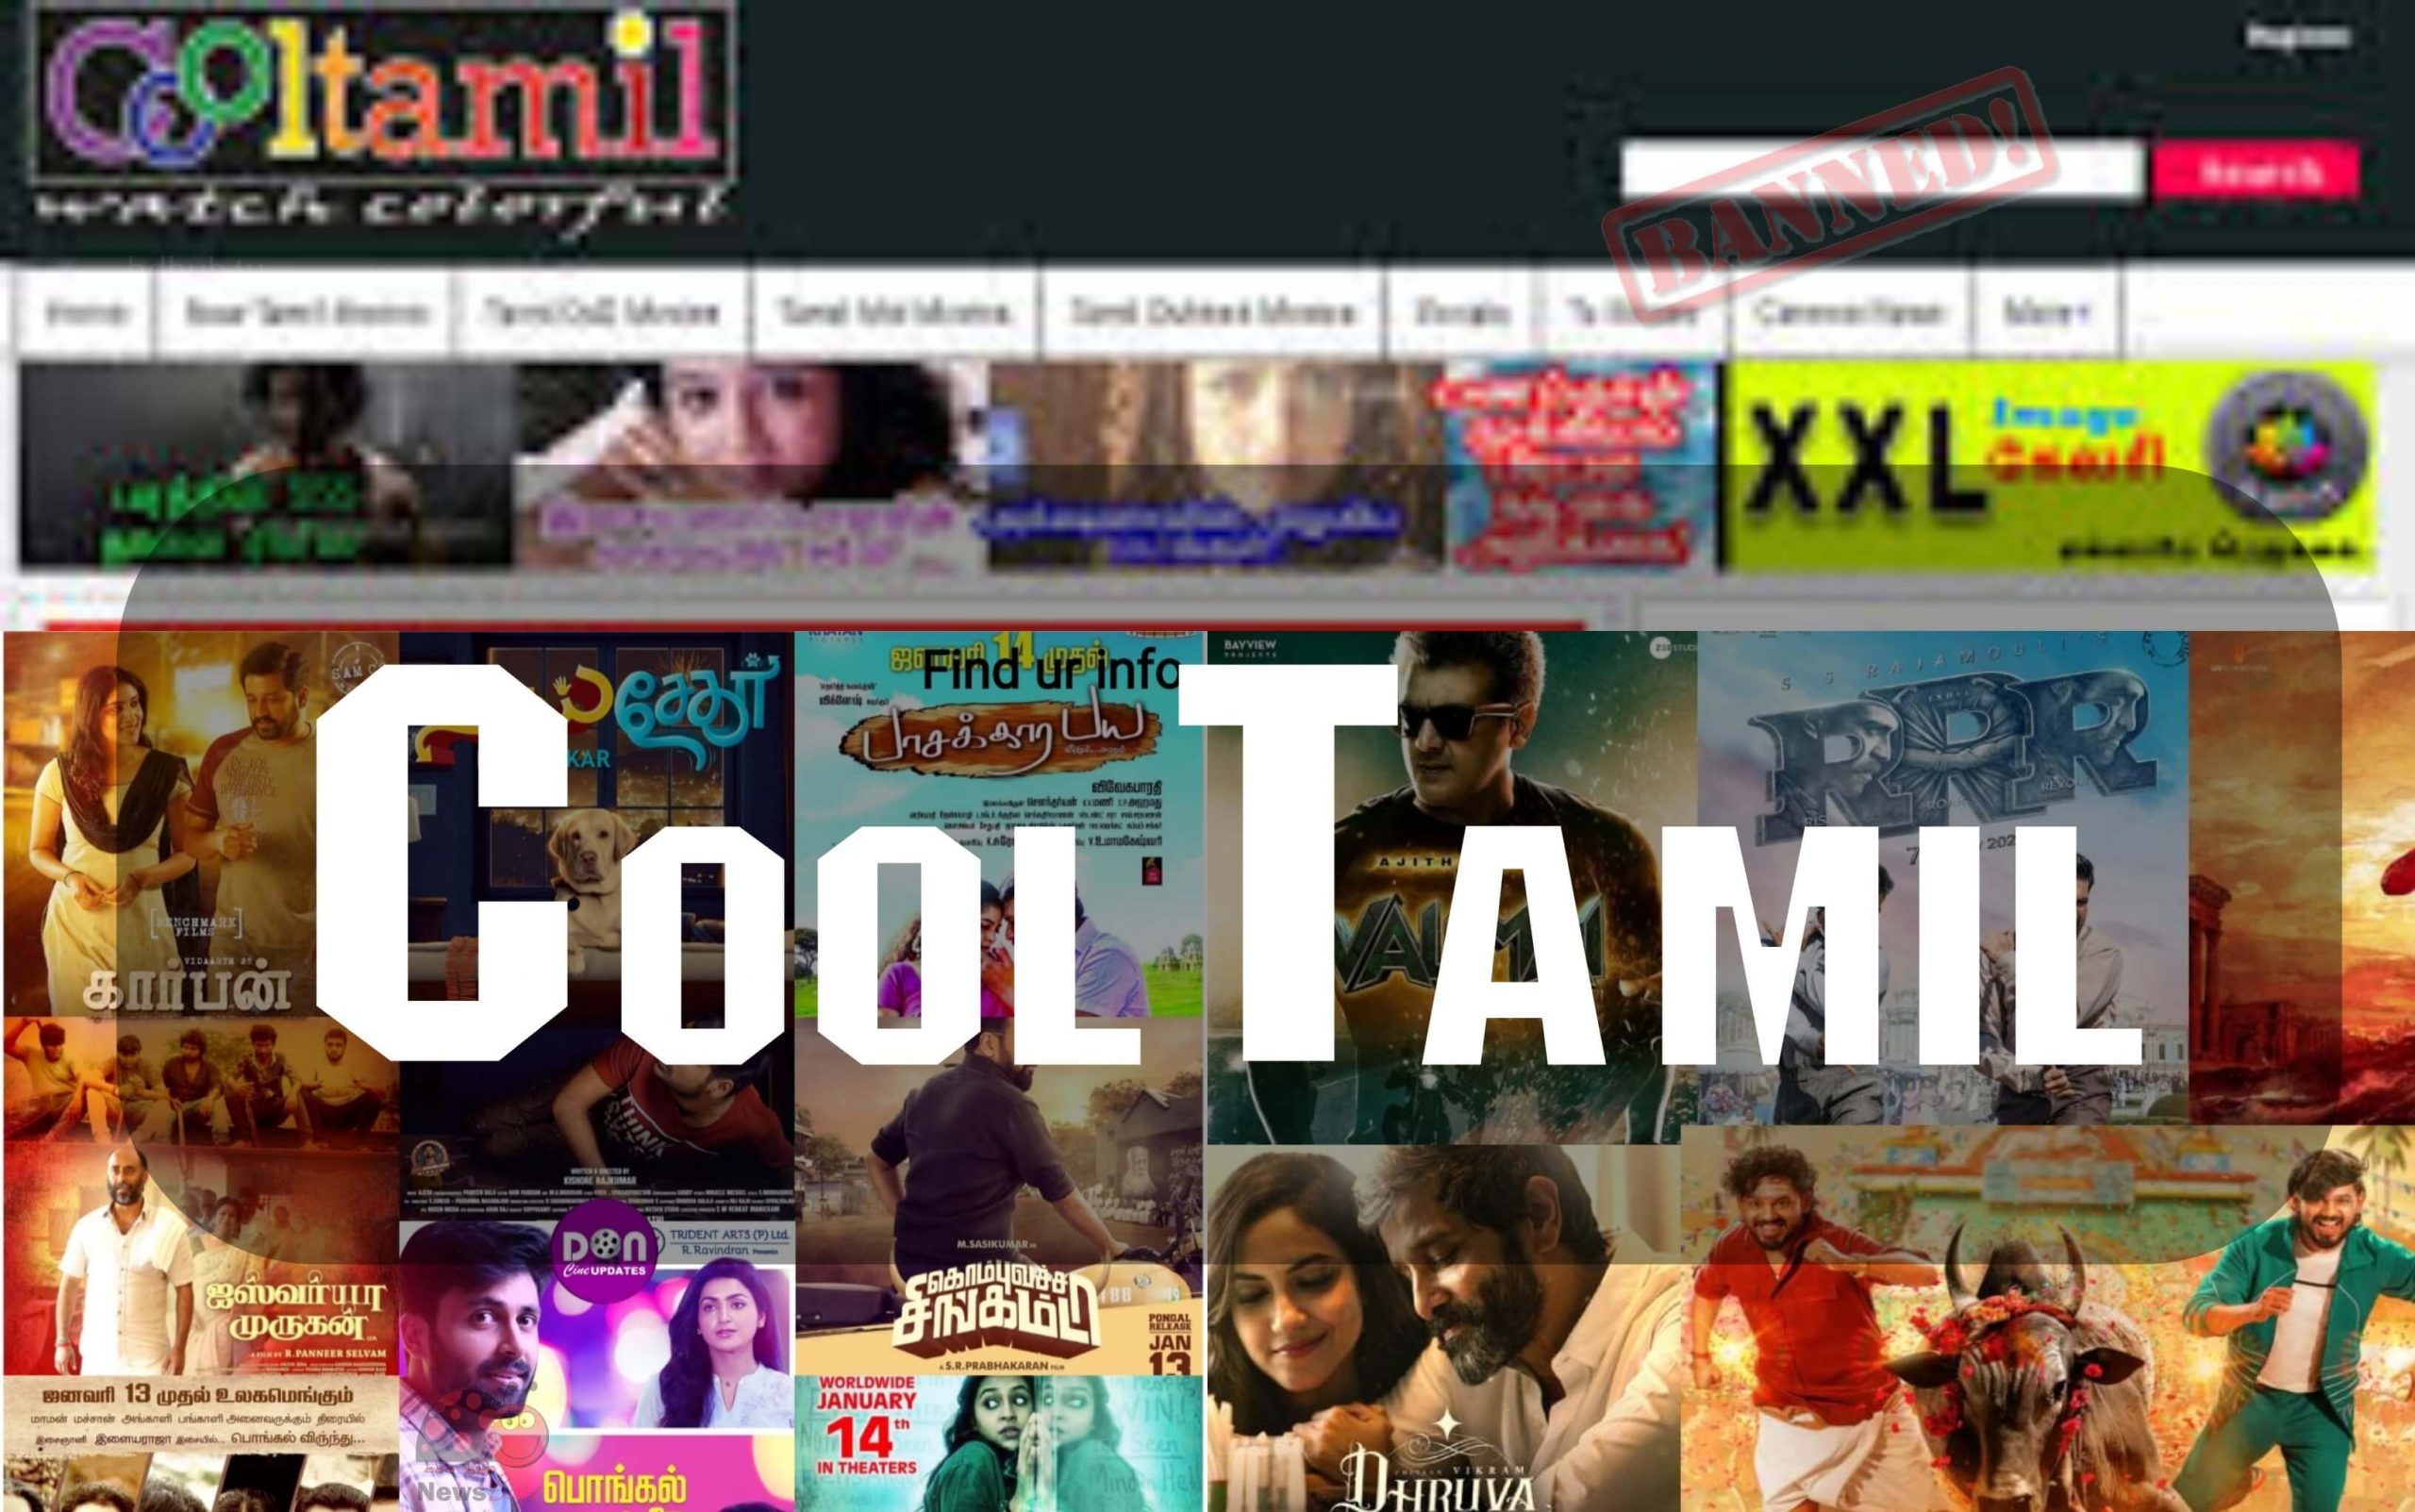 CoolTamil Website 2022: Free Movie Downloads – Is It Legal?